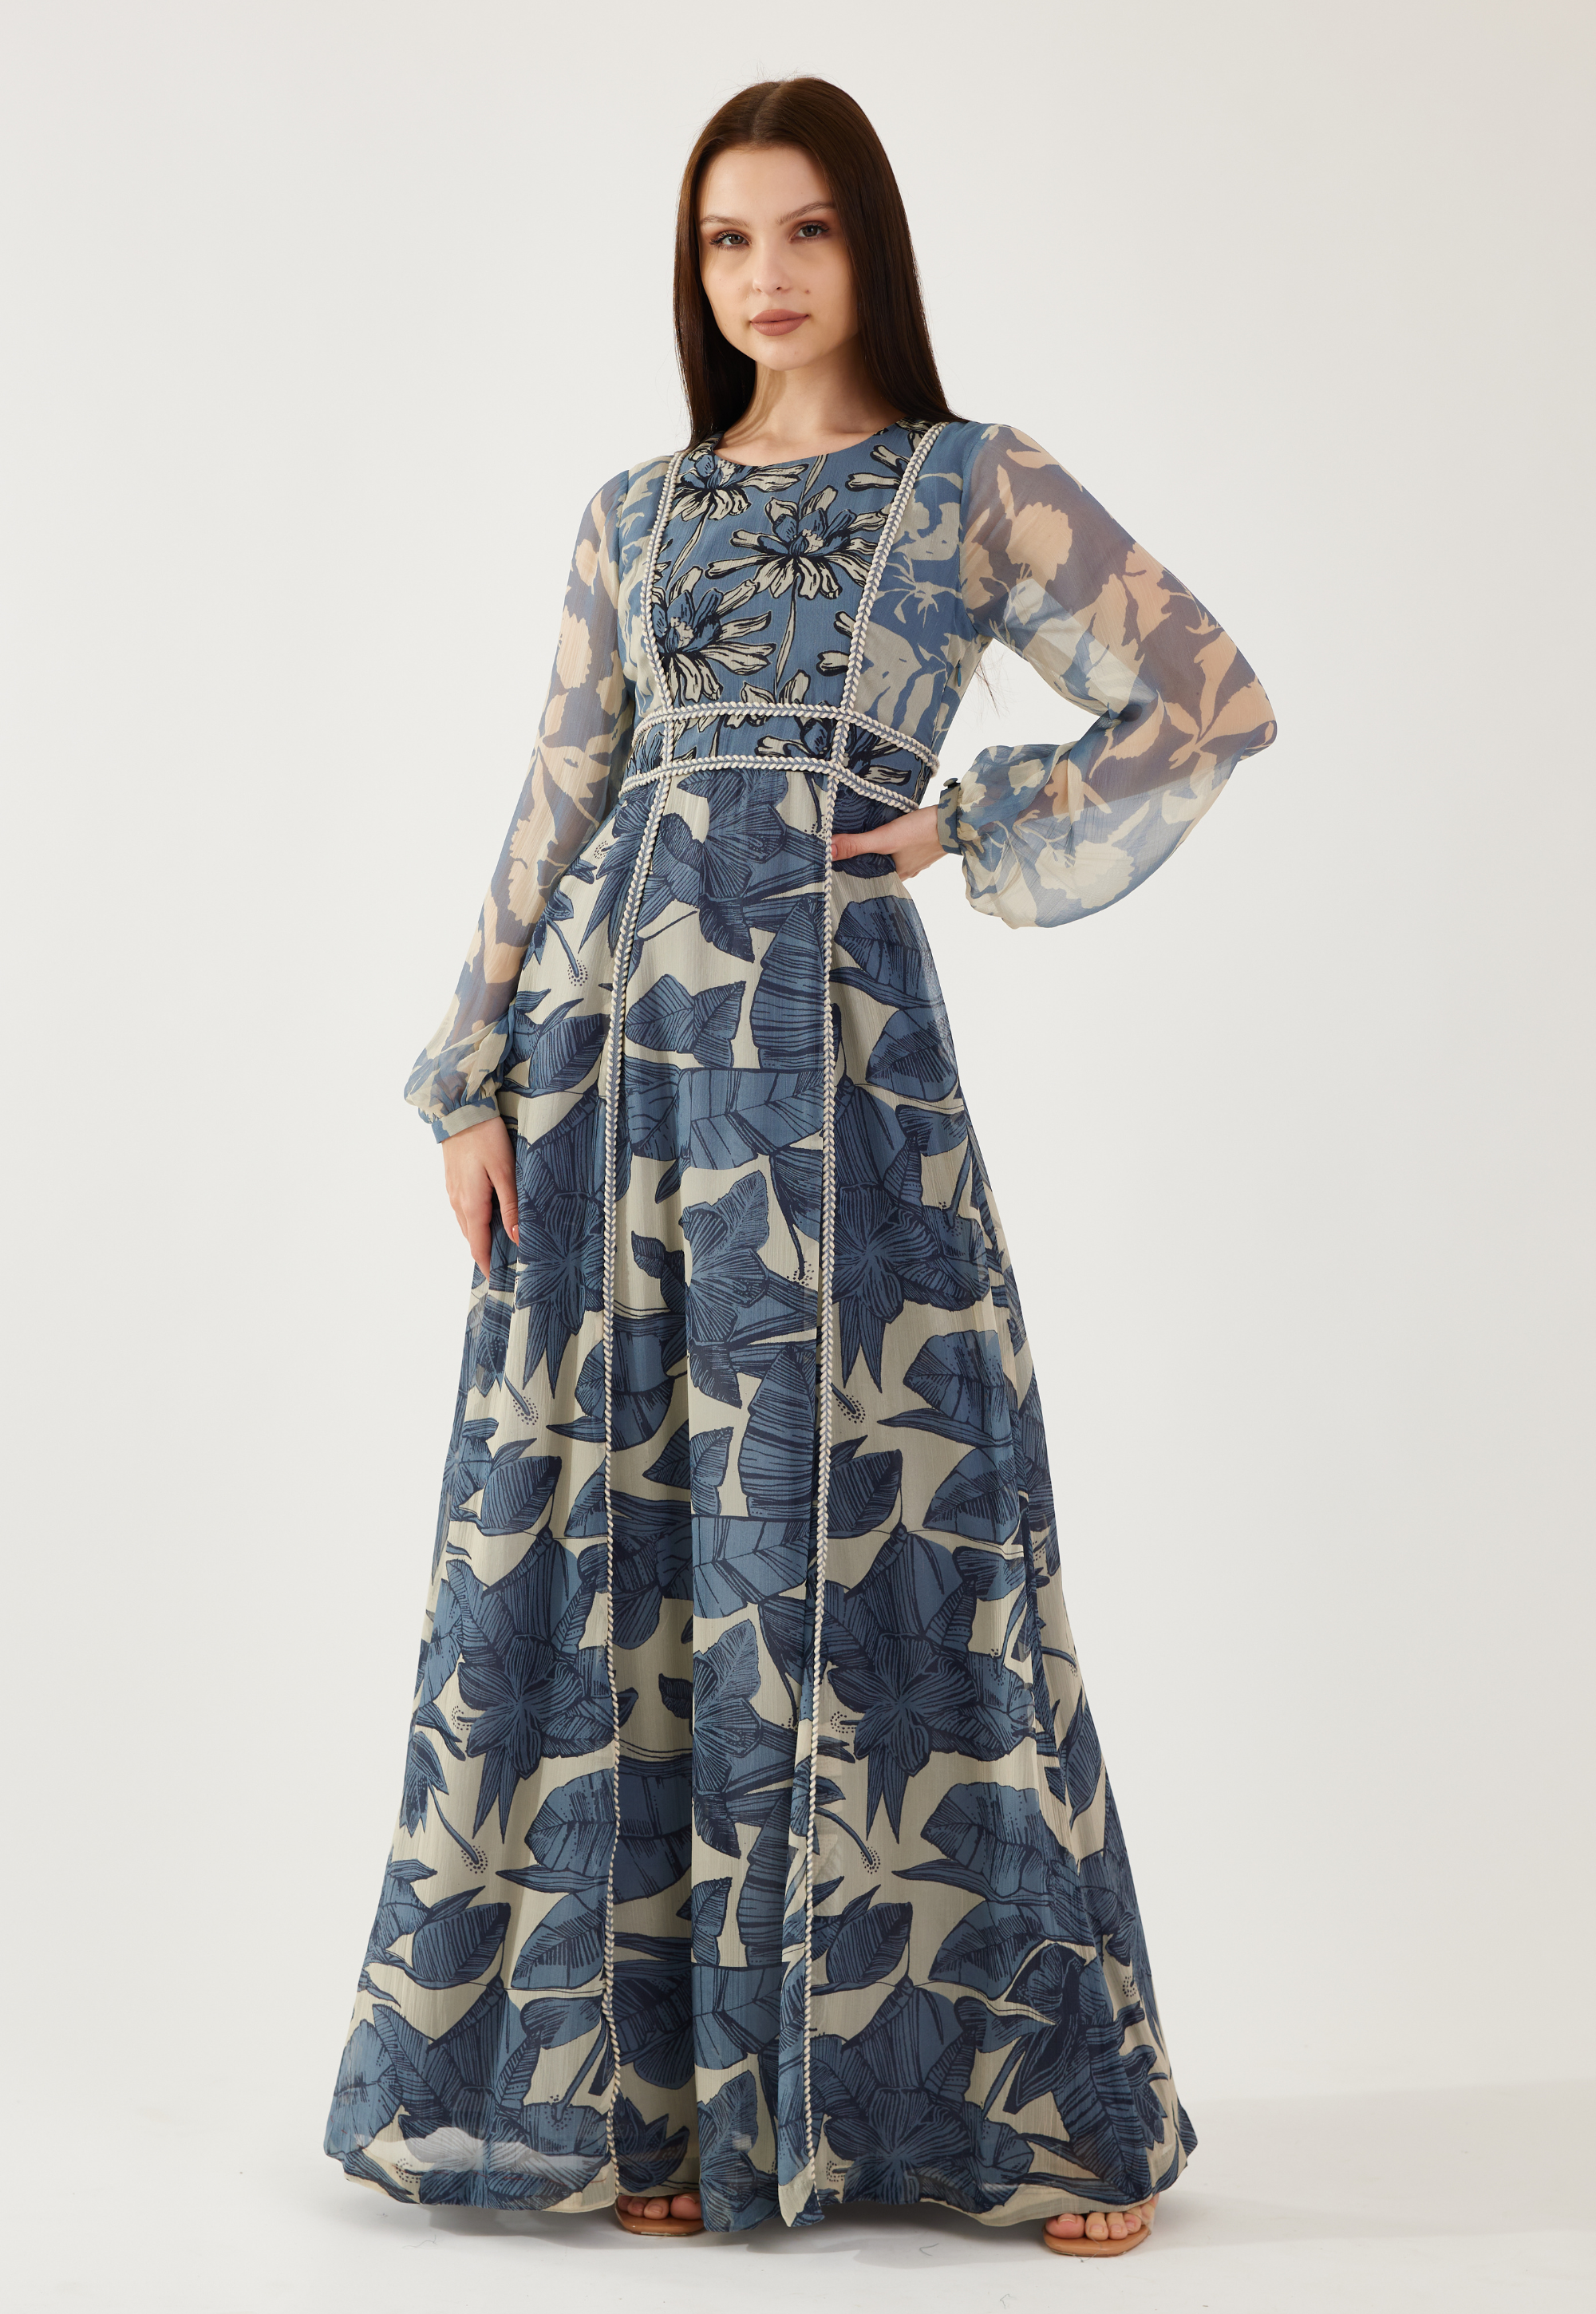 Blue and cream floral embroidered kaftan dress